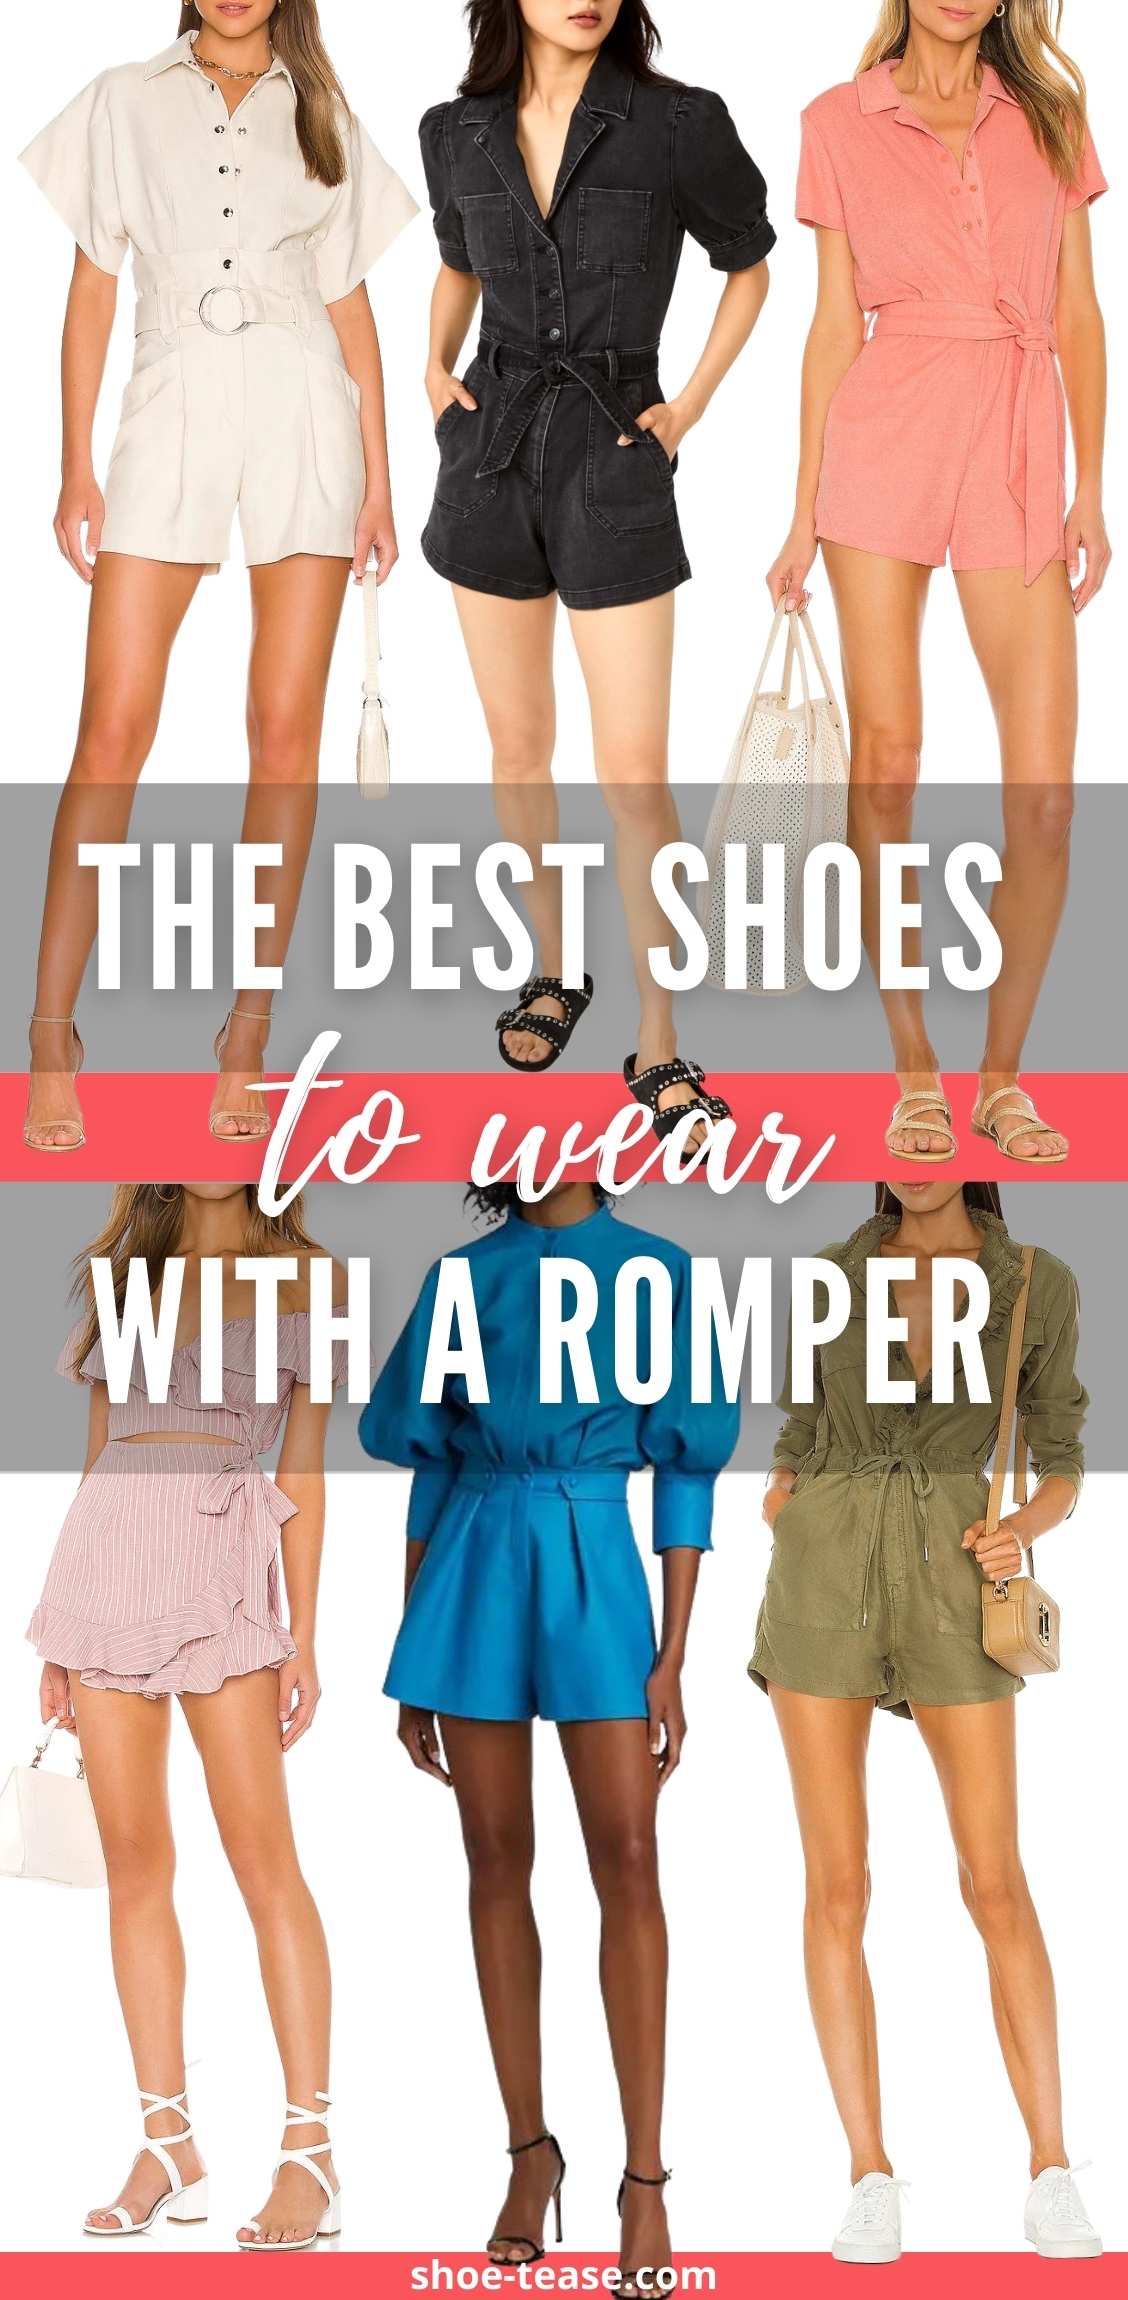 Collage of 6 women wearing different shoes with rompers over text reading the best shoes to wear with a romper.